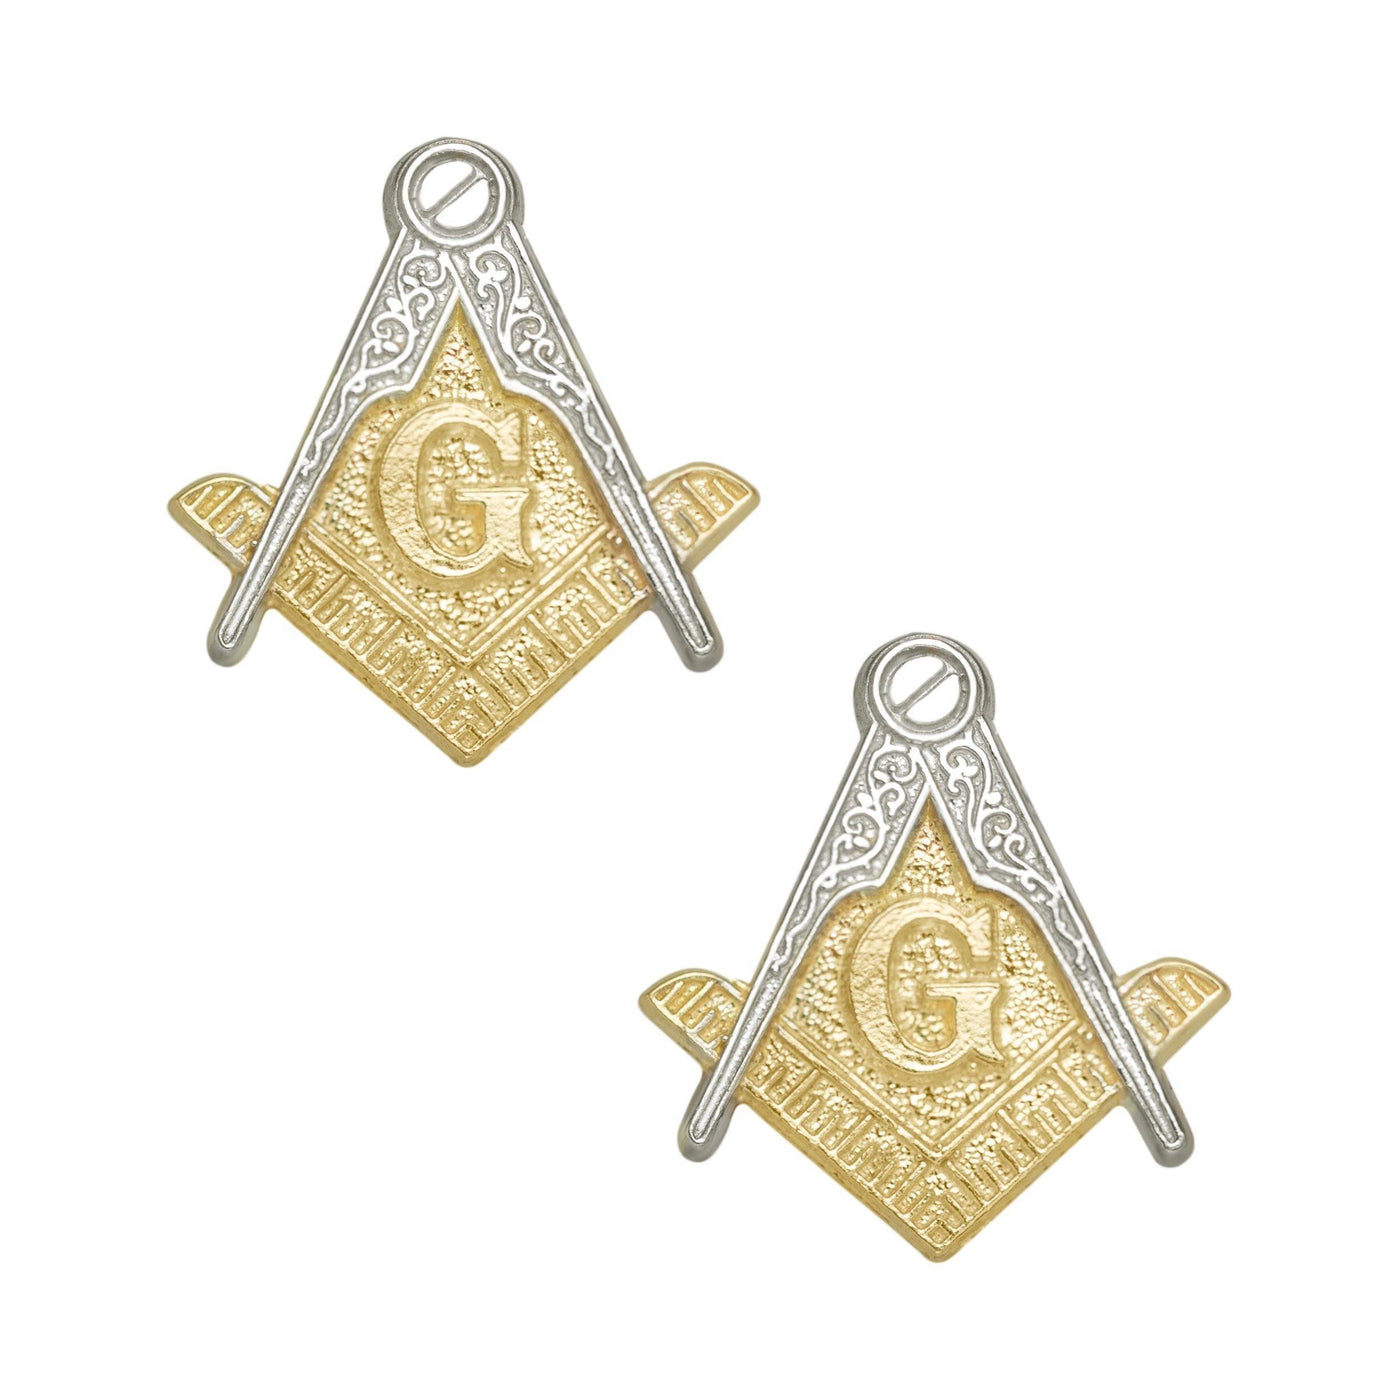 The Square and Compasses Masonic Stud Earrings Solid 10K Yellow Gold - bayamjewelry